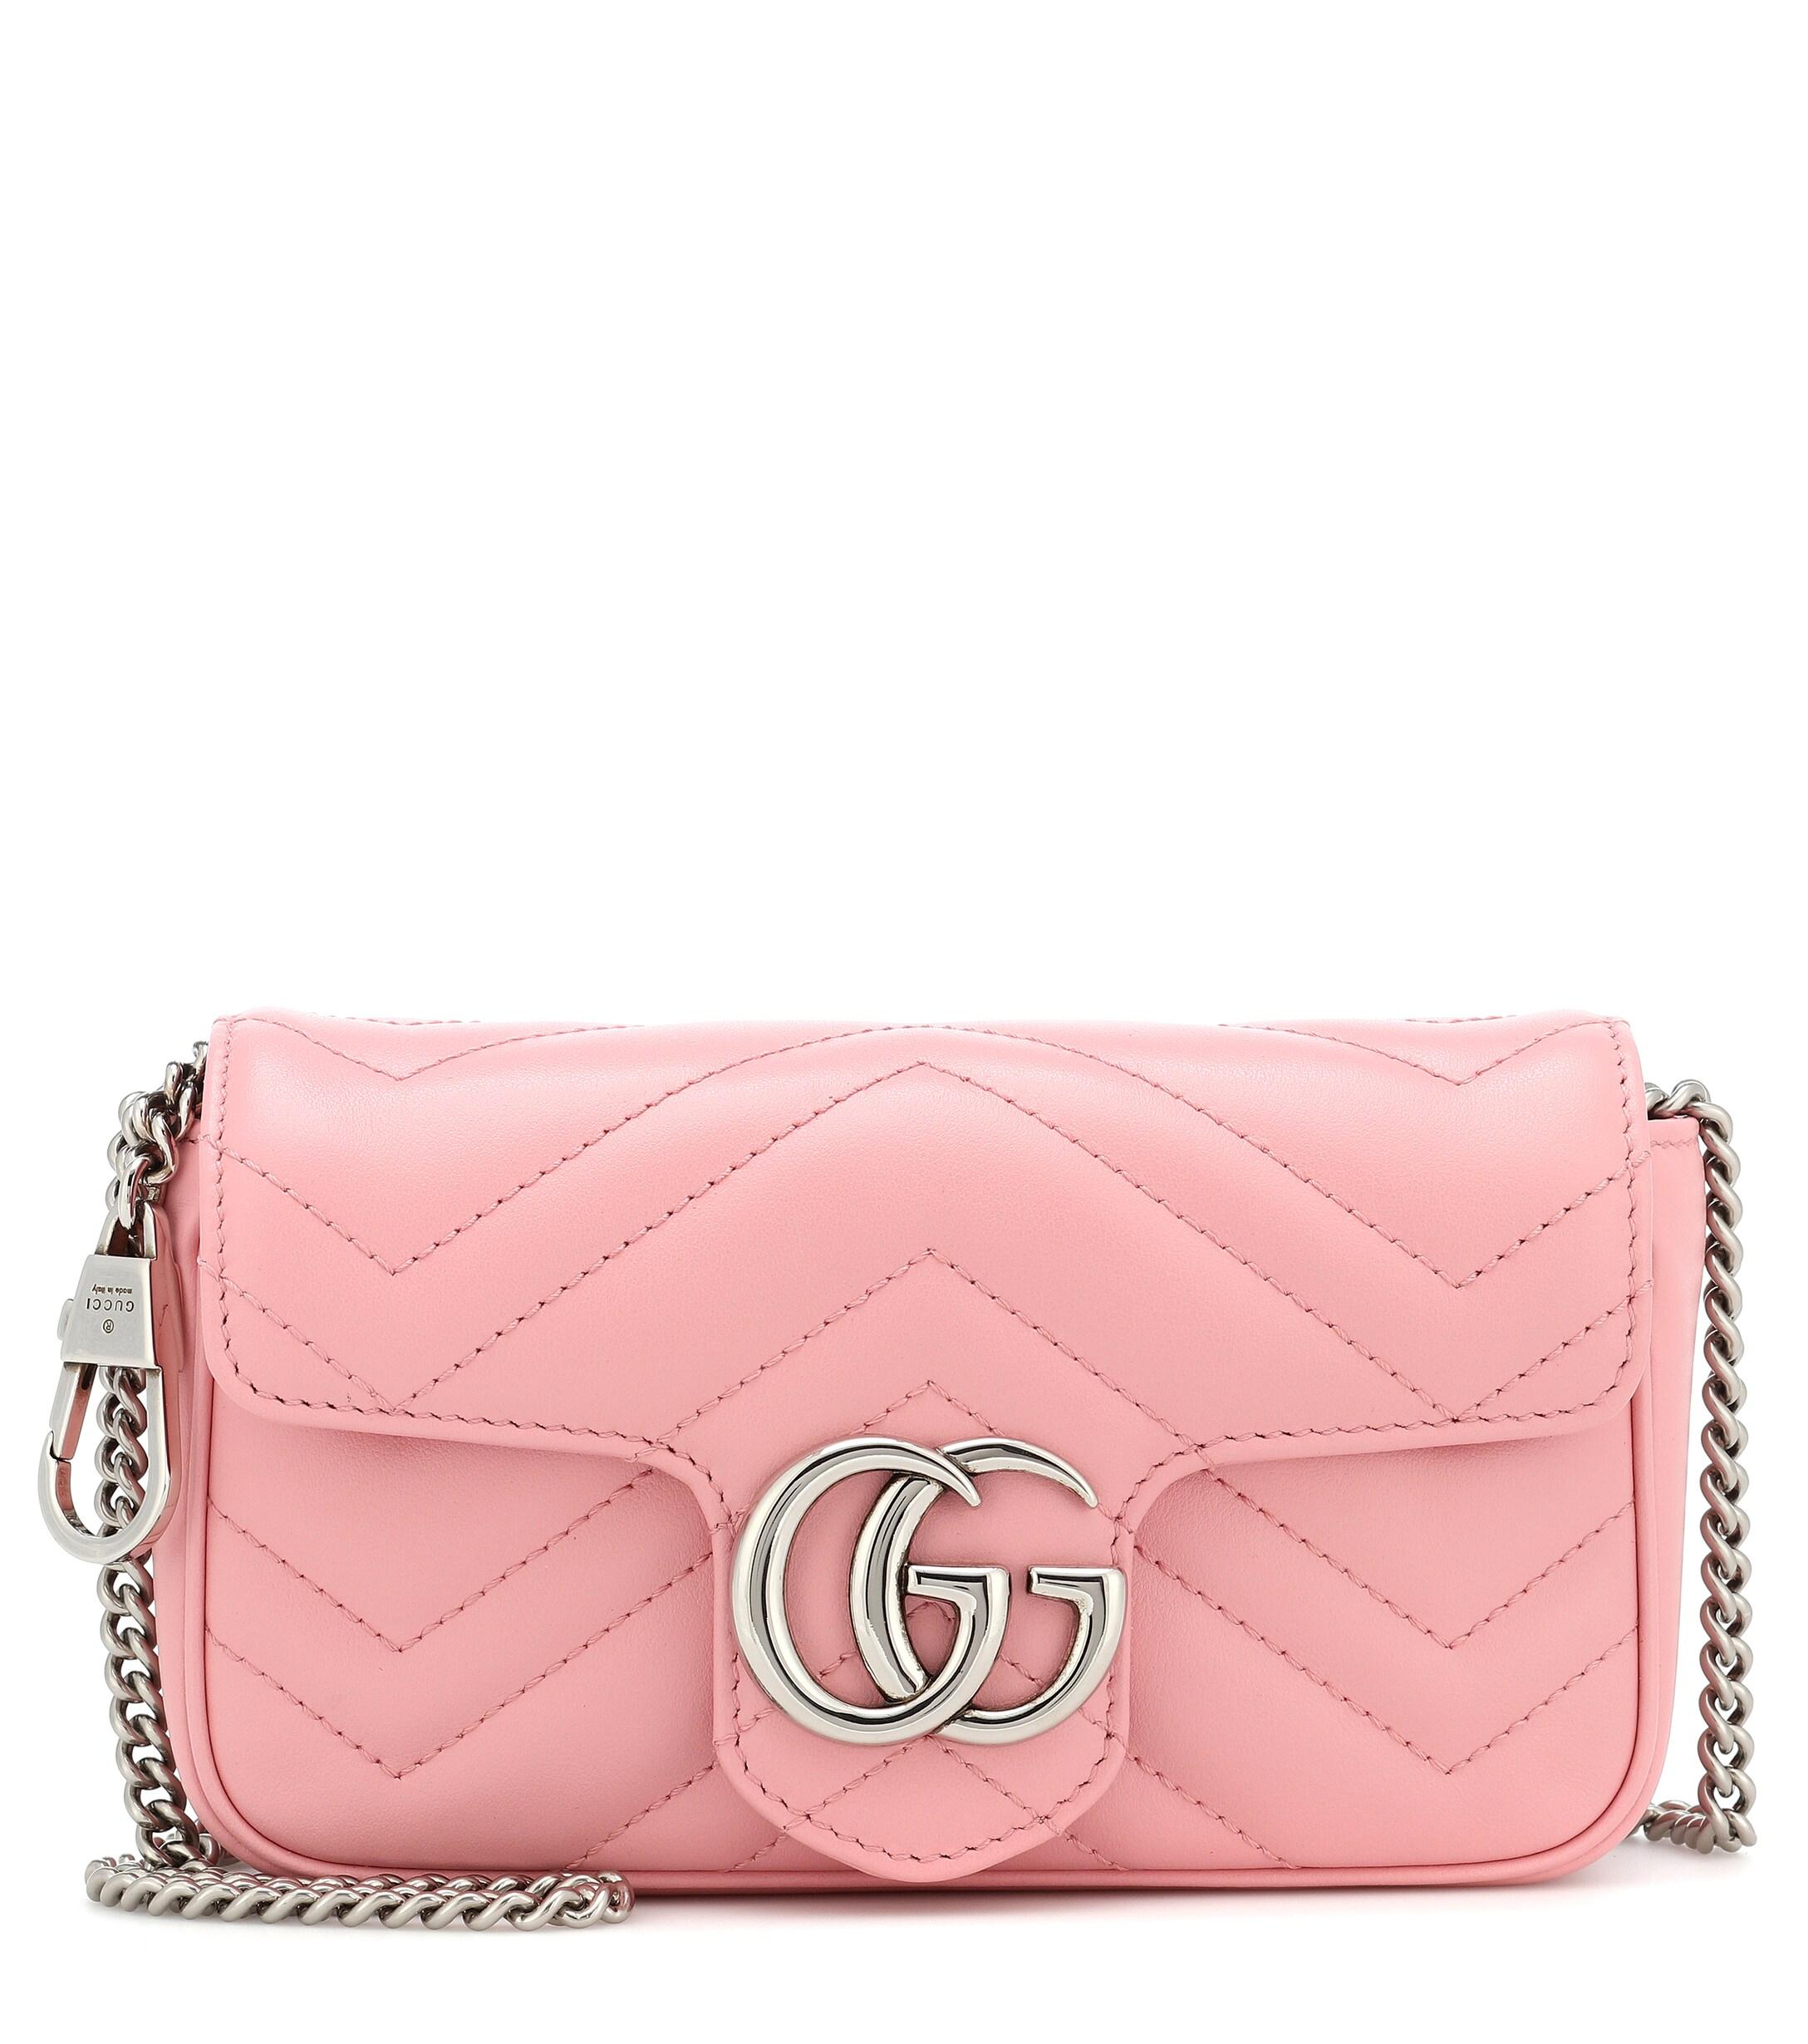 Gucci GG Marmont Super Mini Leather Shoulder Bag in Pink - Lyst